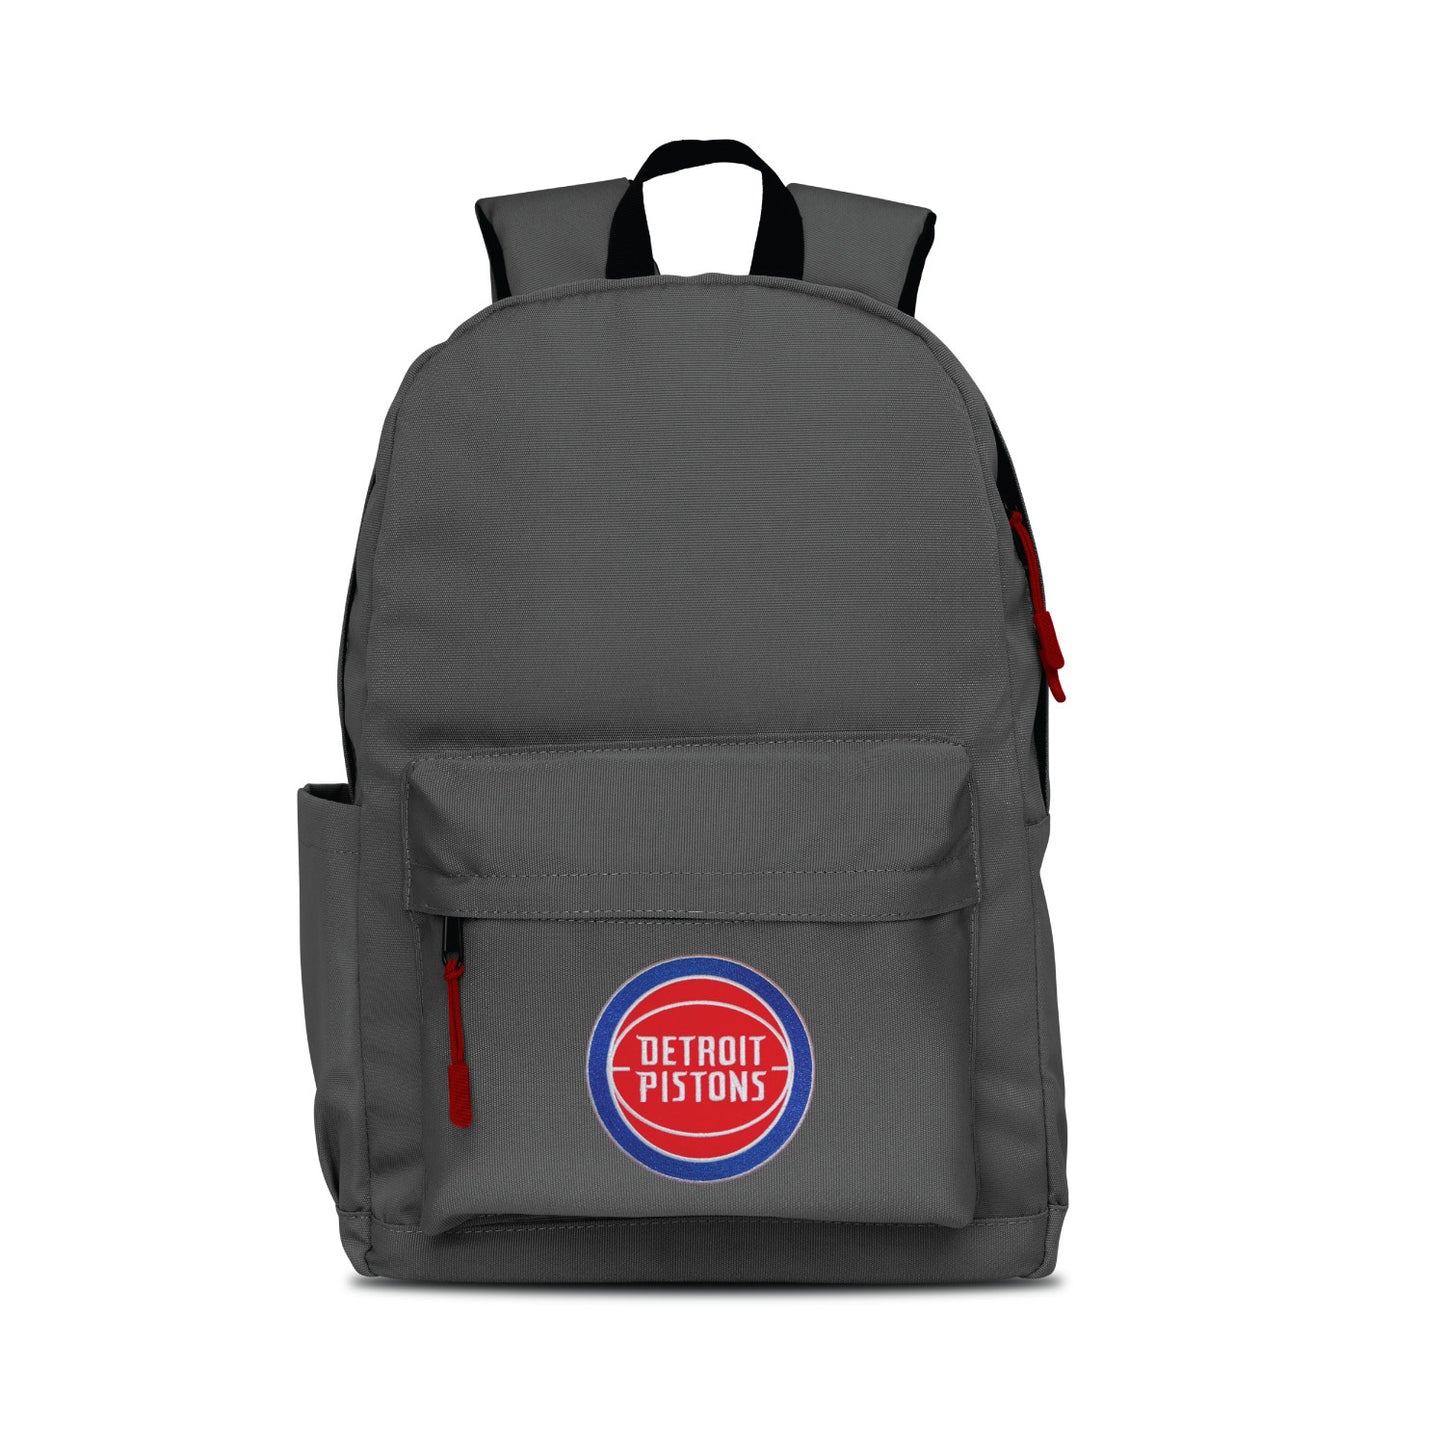 Detroit Pistons Campus Laptop Backpack - Gray